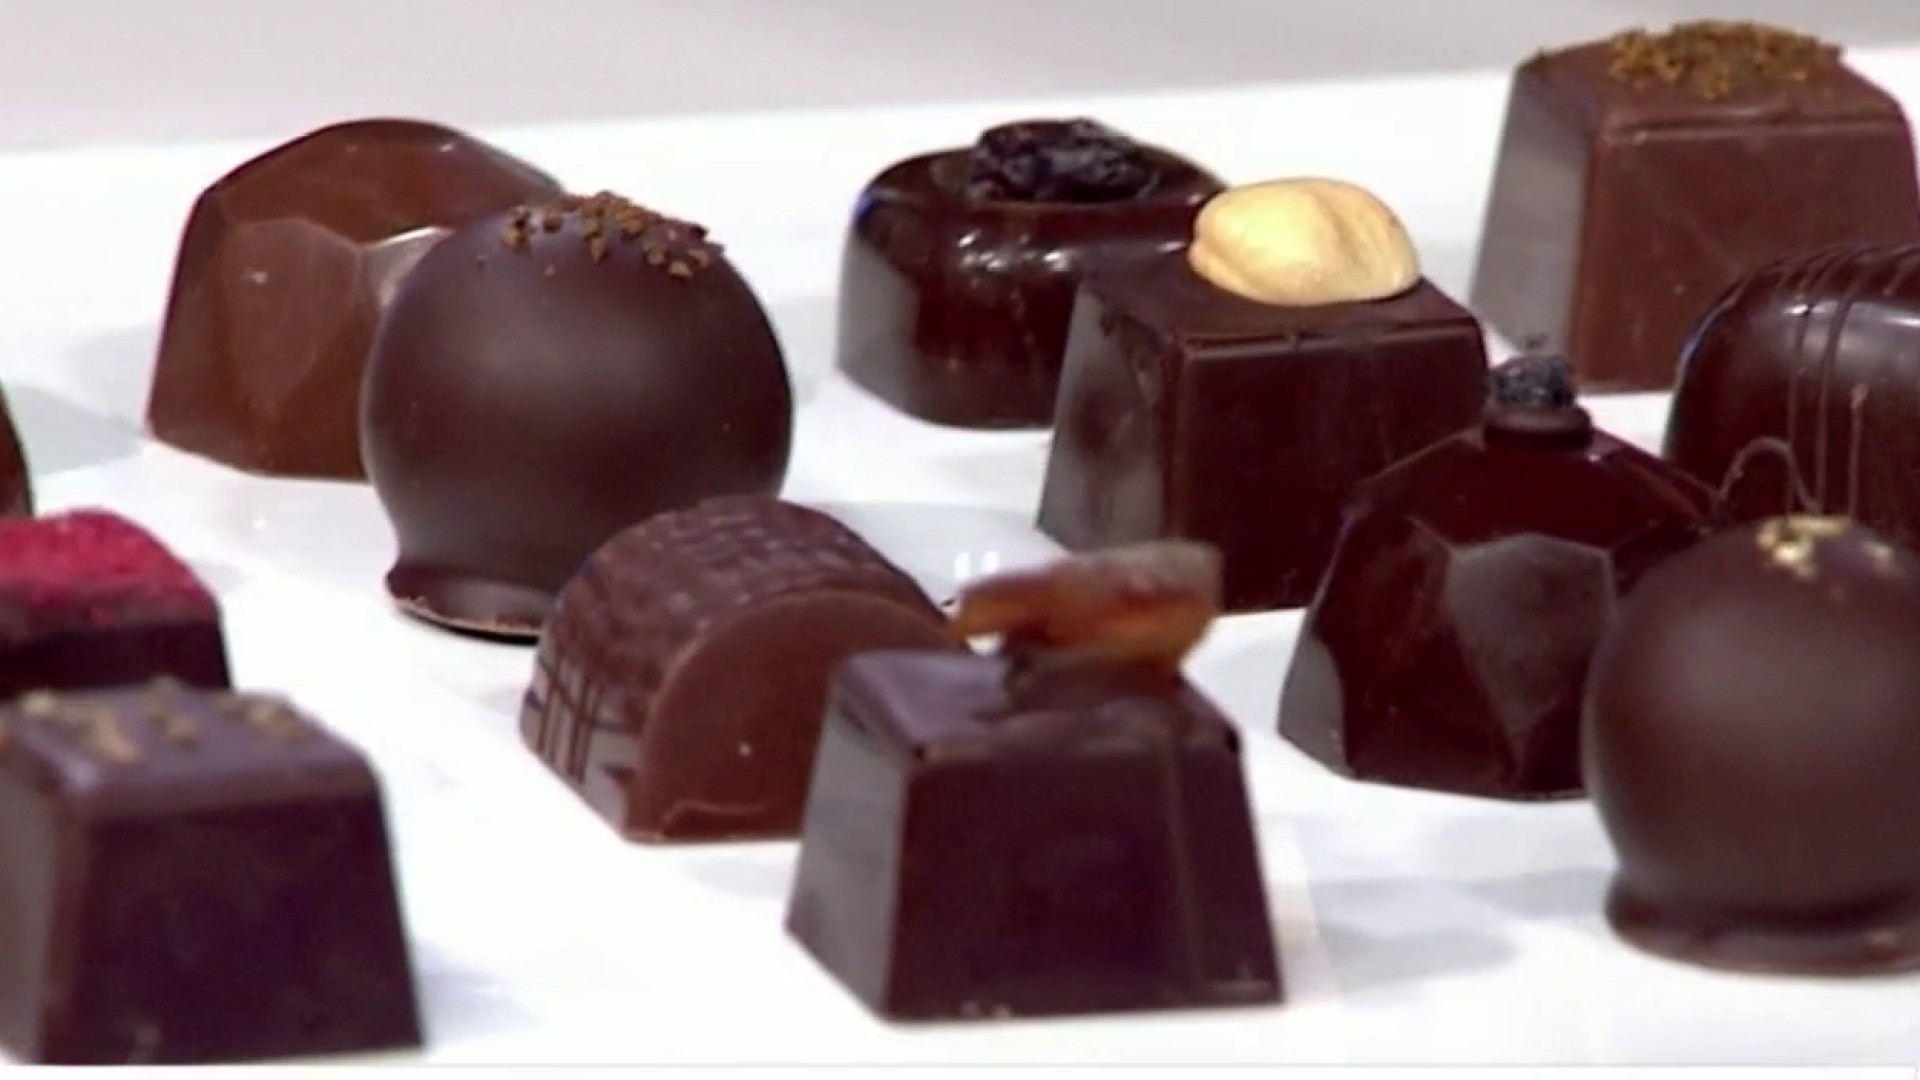 Make gourmet chocolate at home for the holidays! - WDIV ClickOnDetroit